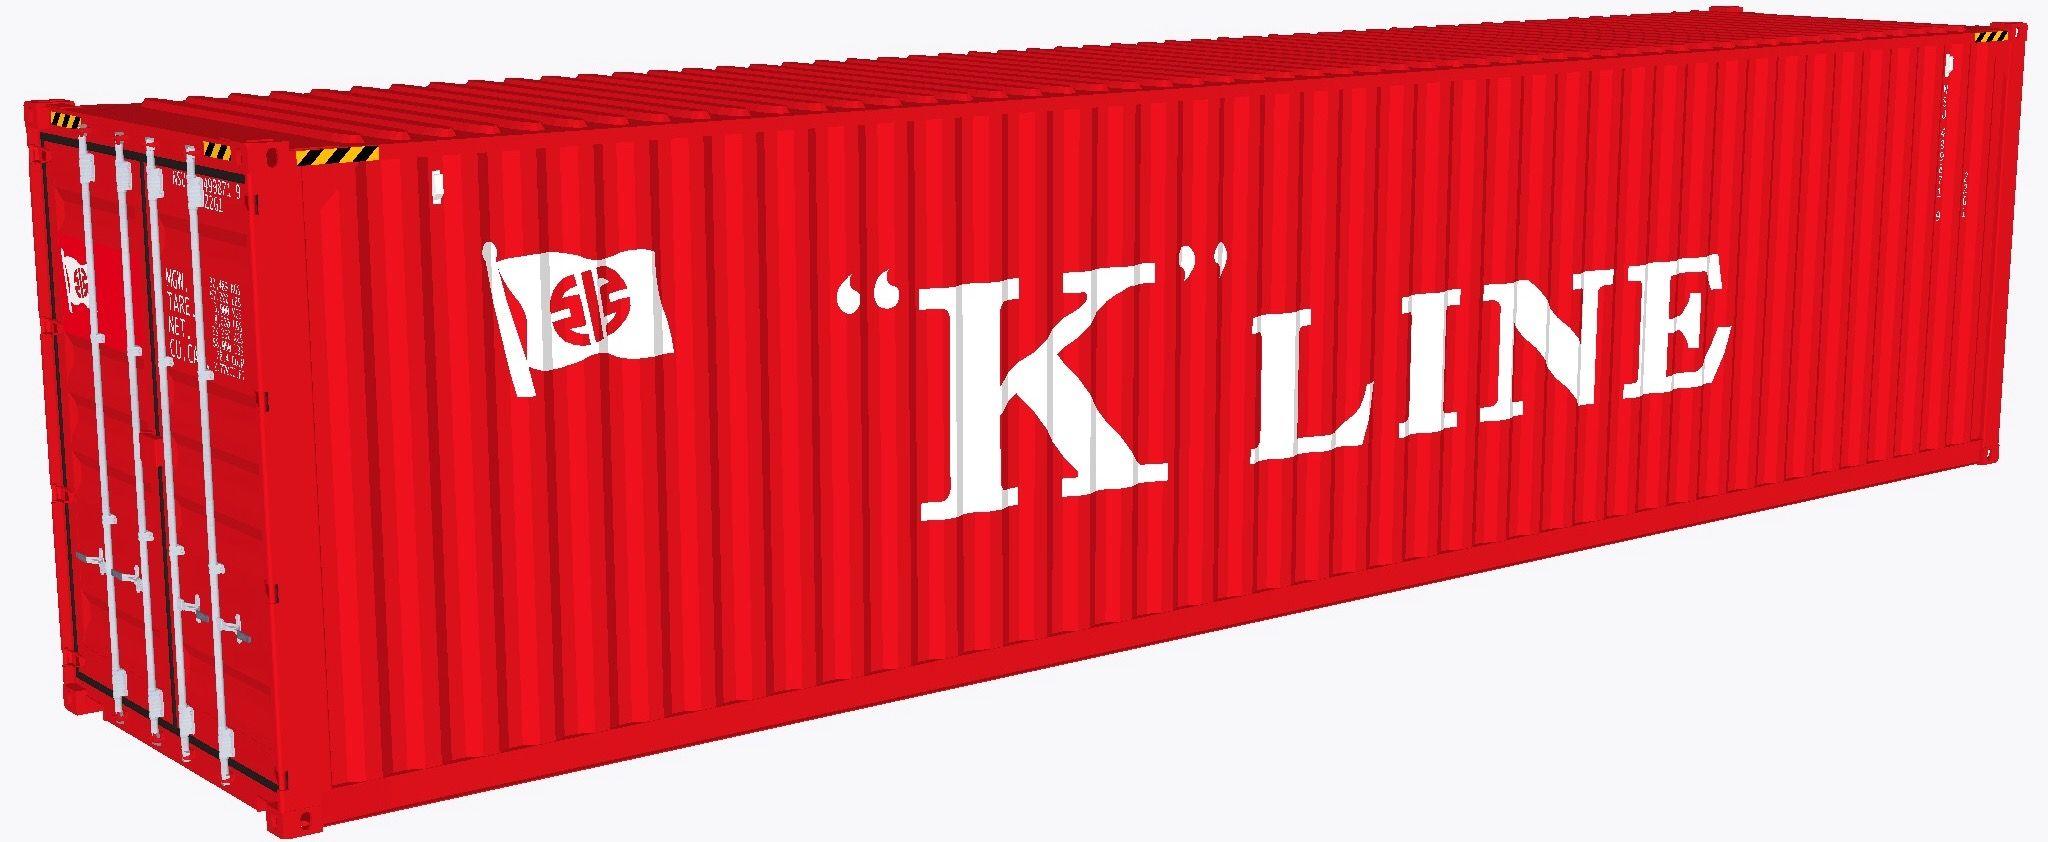 K in Red Rectangle Logo - File:K Line container.jpeg - Wikimedia Commons